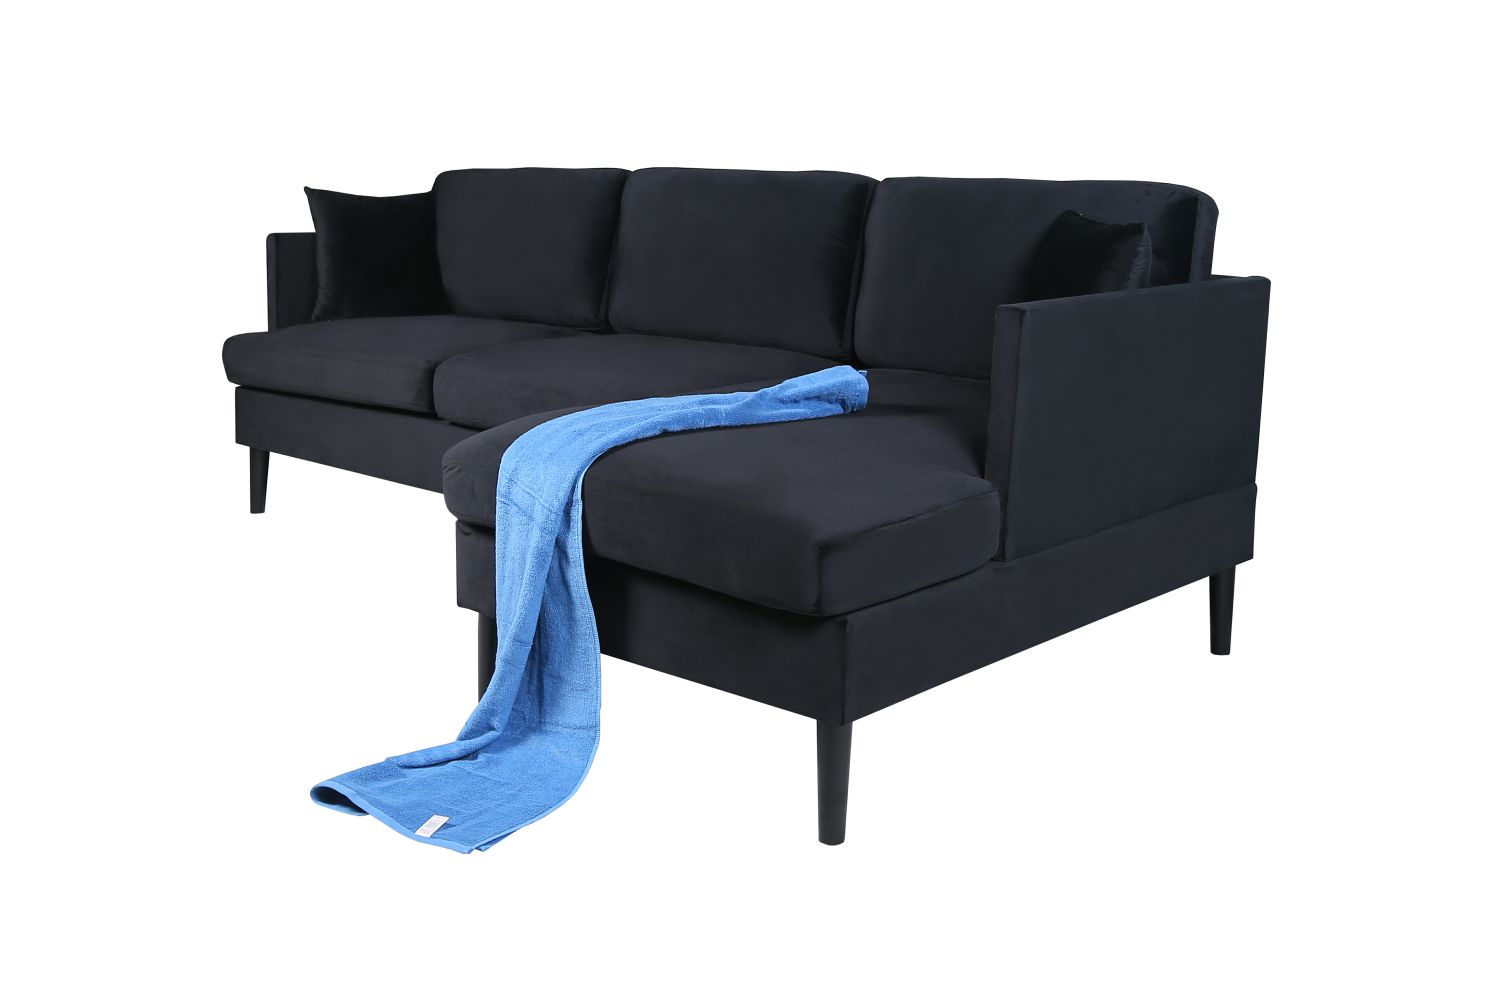 L-shape Sectional Sofa Velvet Right Hand Facing with Solid Wood Legs and Removable and Washable Seat Cover，Black - image 3 of 7